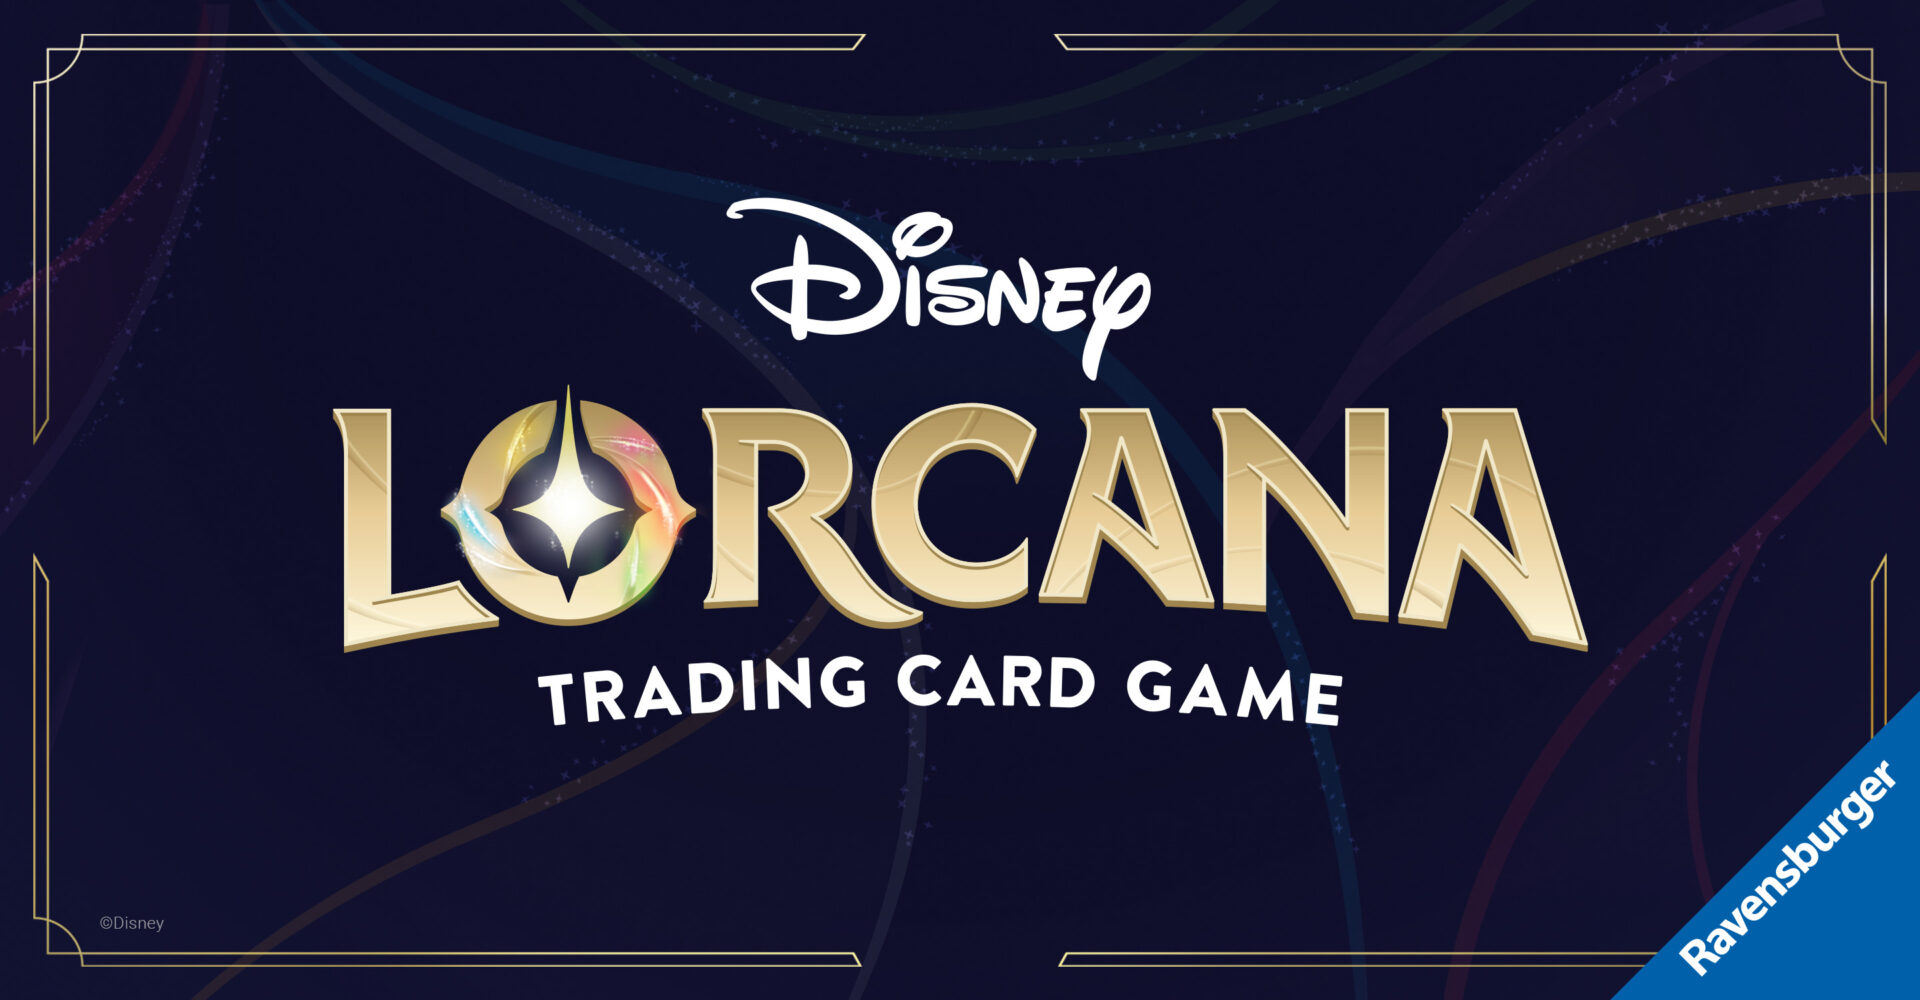 Gameplay Rules Revealed for Disney’s Lorcana Trading Card Game